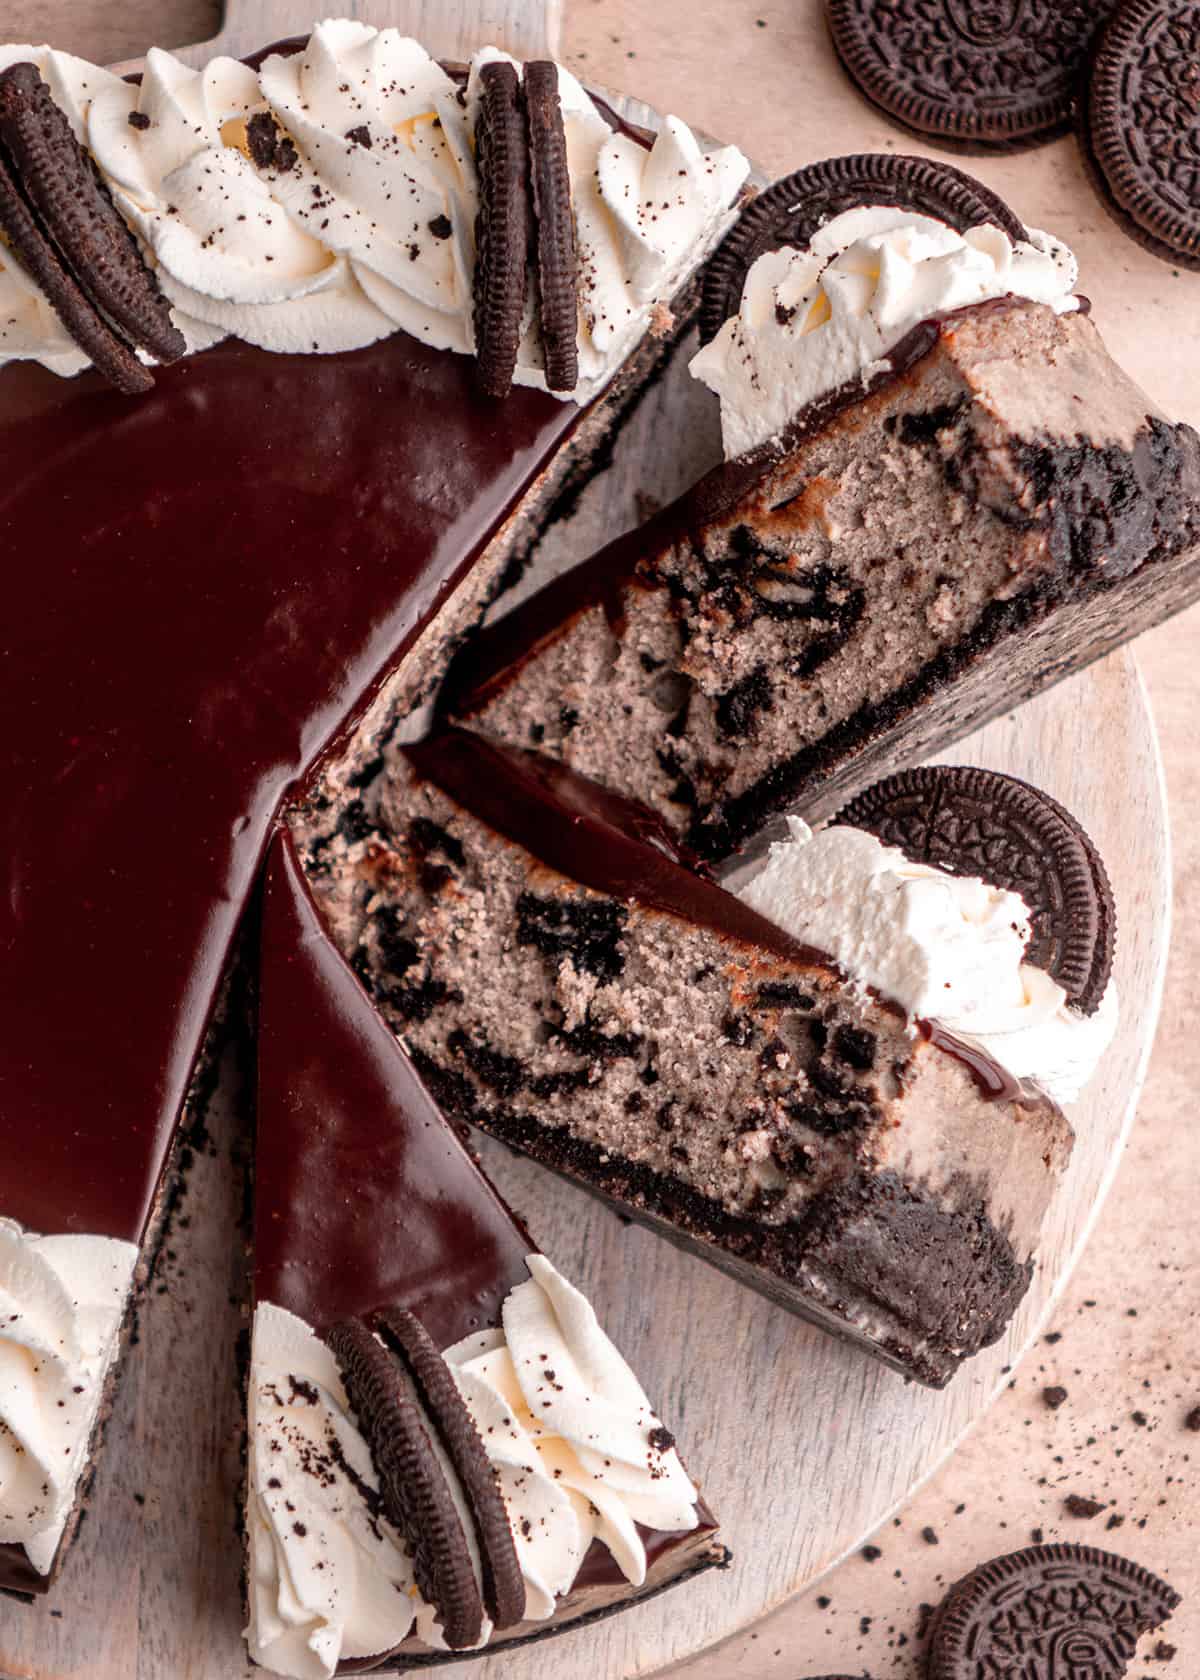 Oreo Cheesecake with 3 slices cut out of it